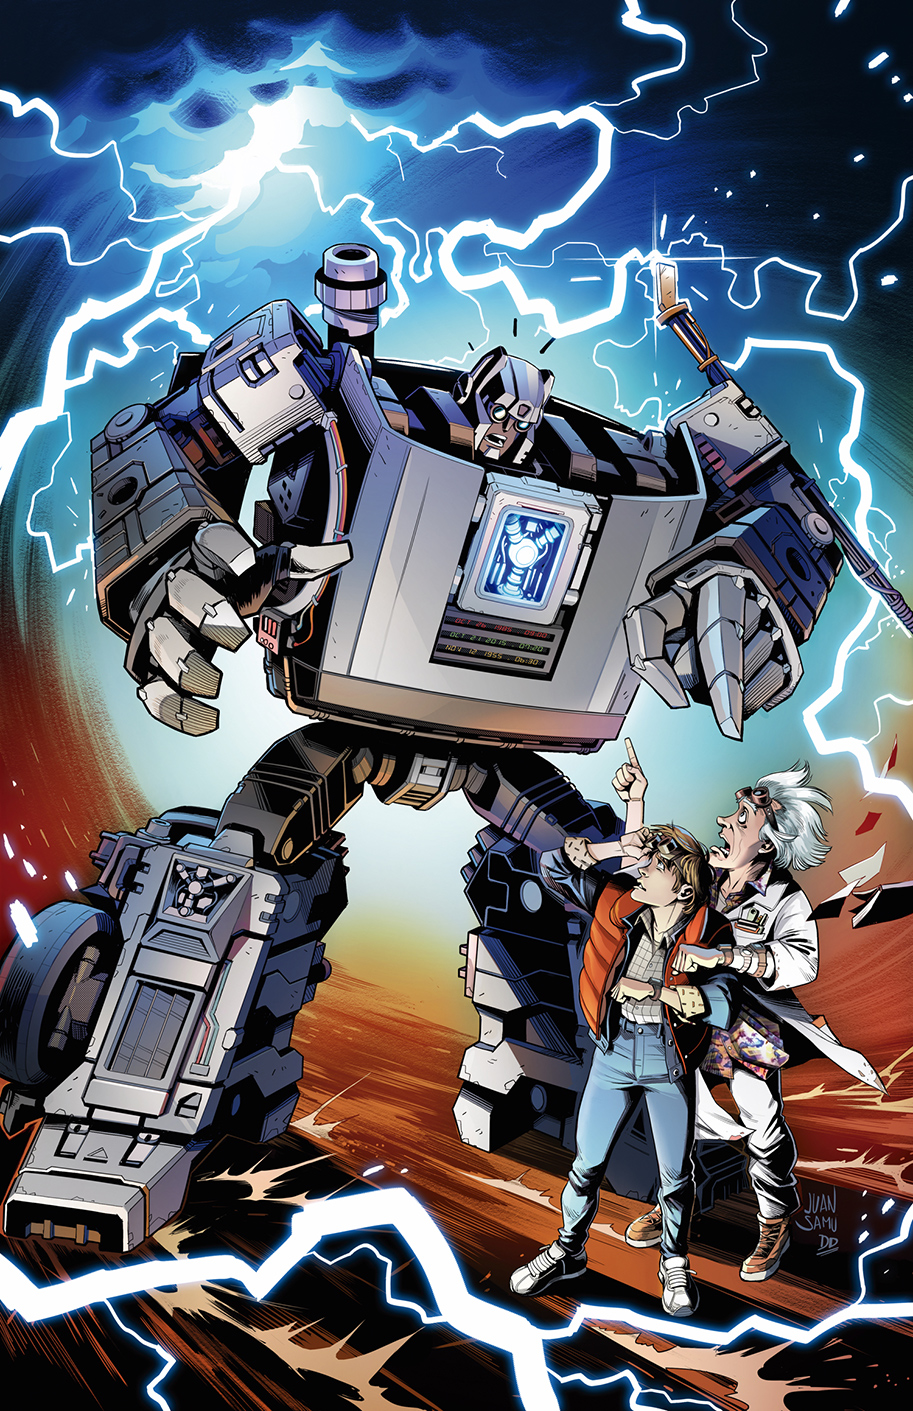 Back to the Future, Transformers